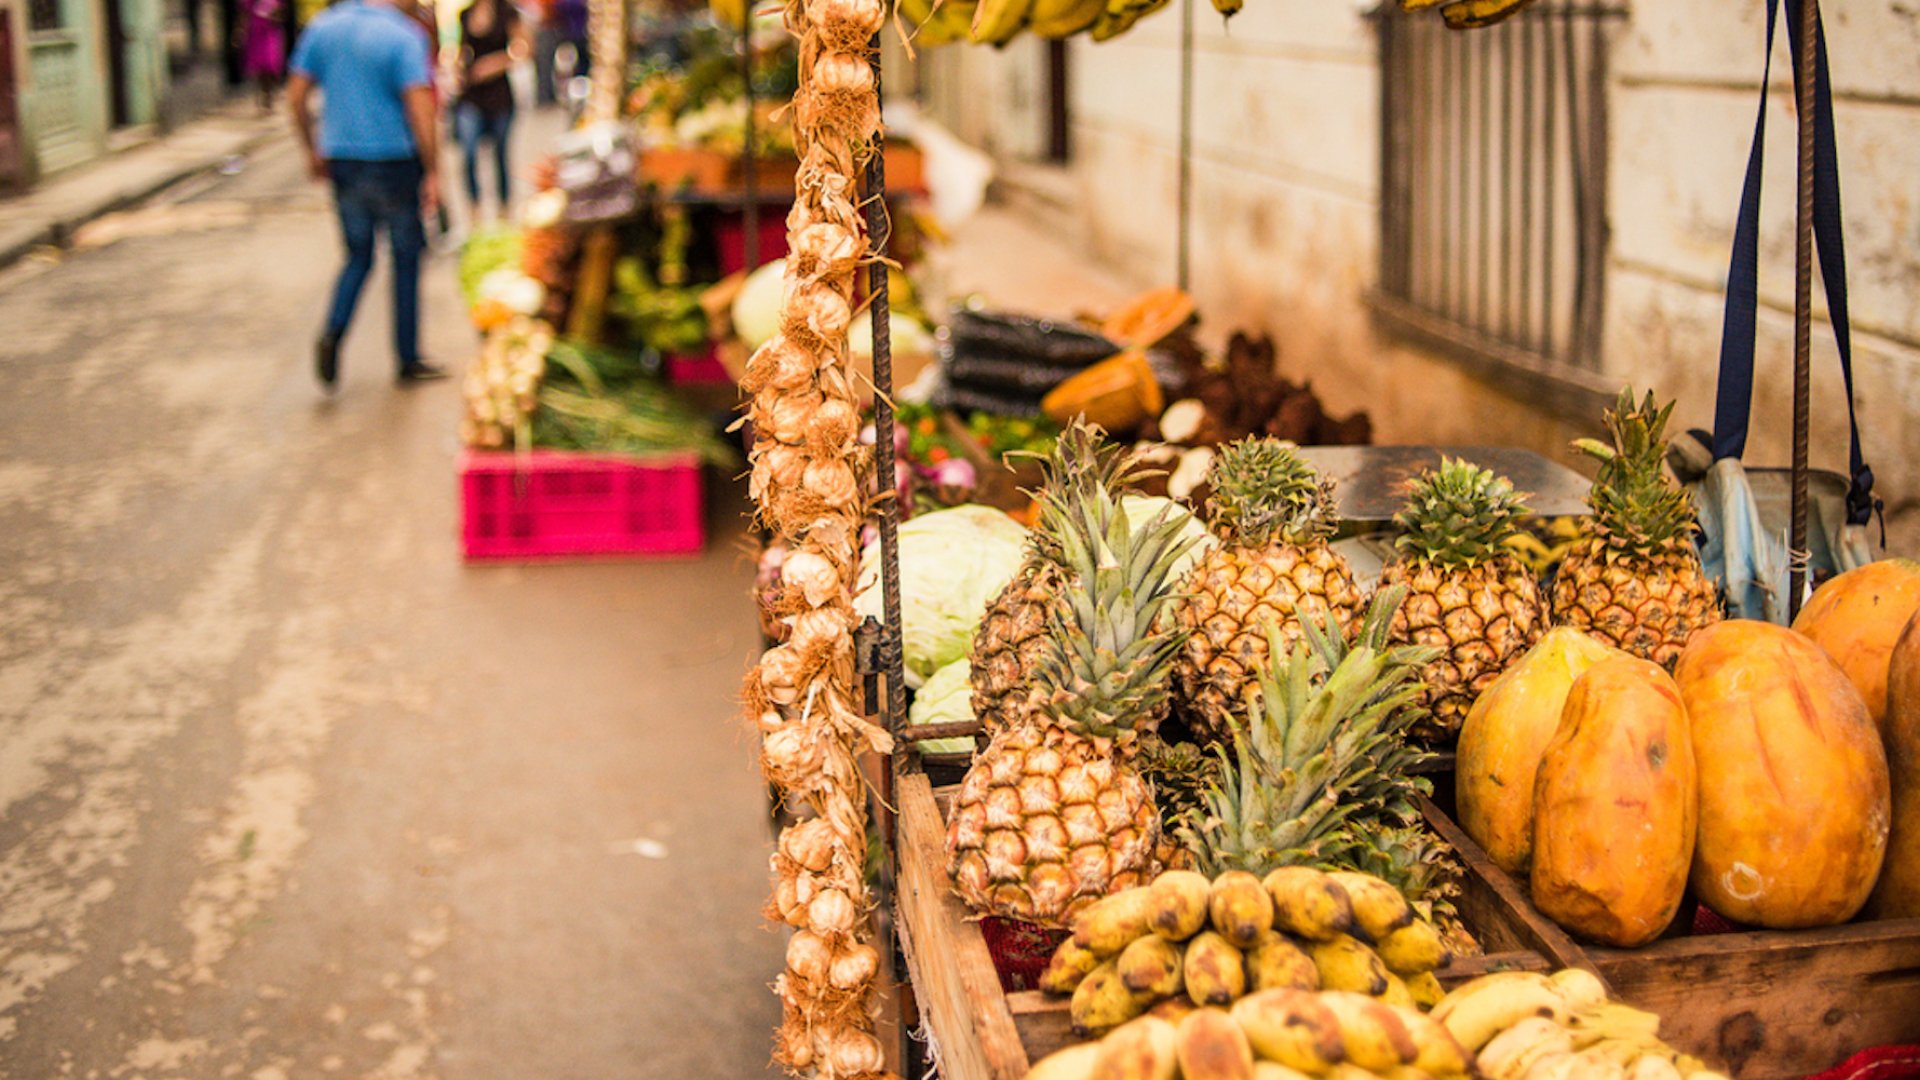 Fruits and vegetables on a street stand in Cuba